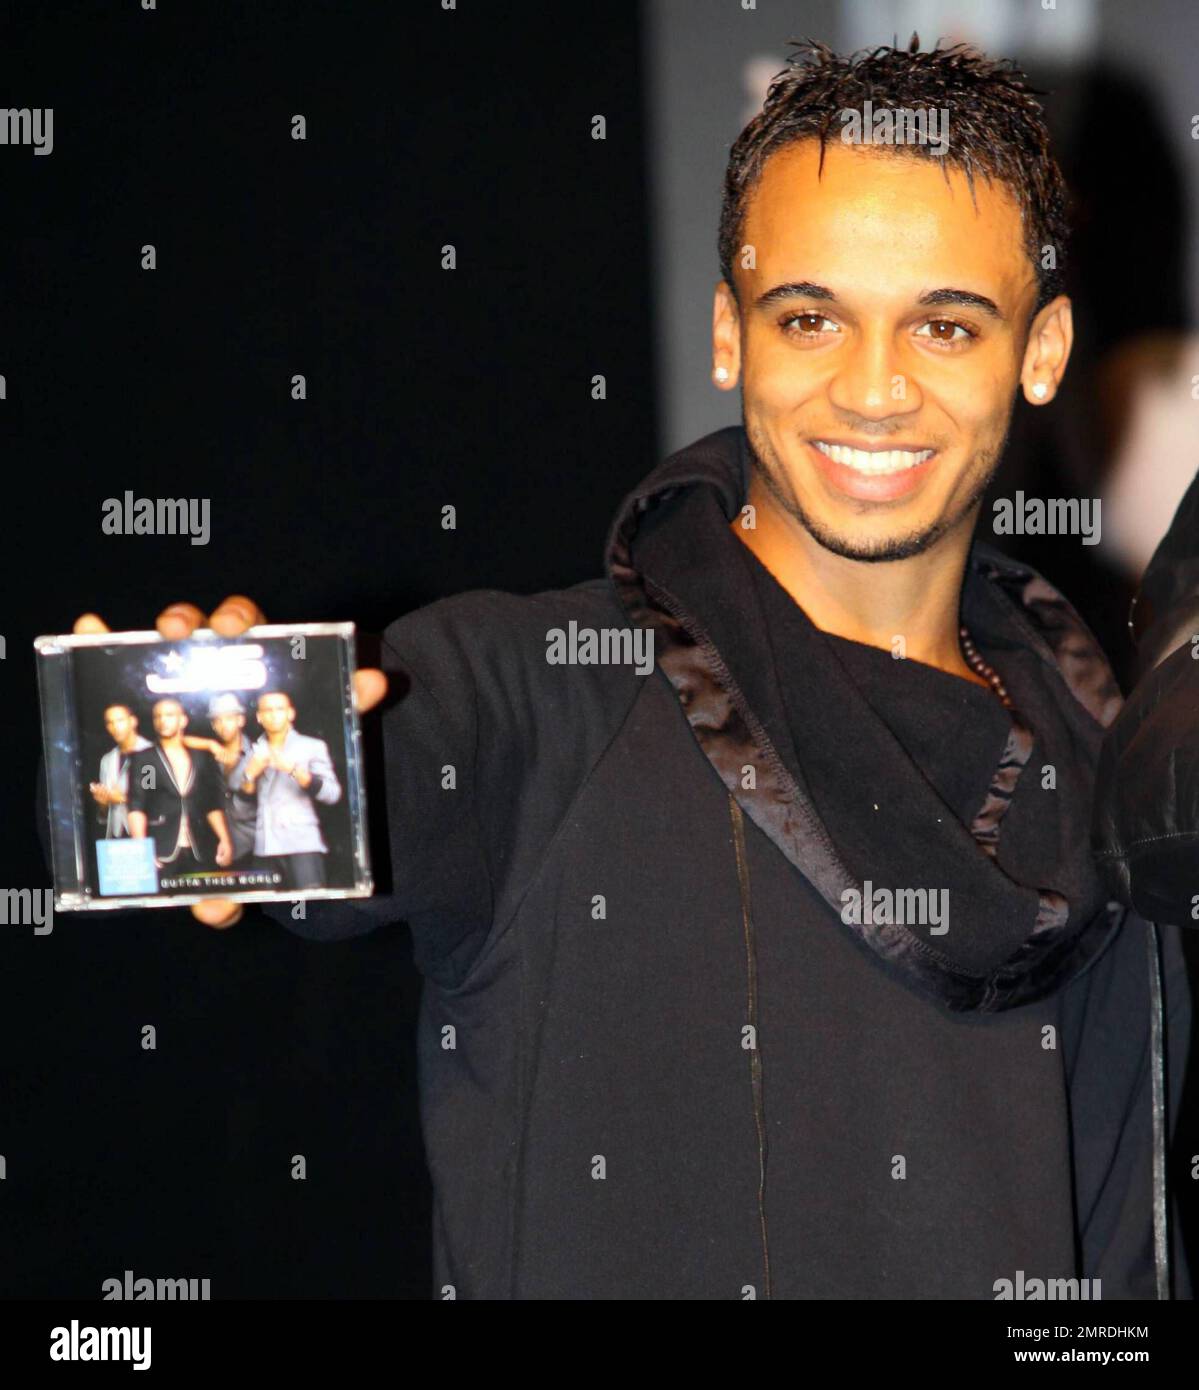 Pop foursome JLS meet fans and sign copies of their new album 'Outta This World' at Heaven. The UK boy band, whose initials stand for 'Jack the Lad Swing,' was a runner up in the fifth series of 'X Factor' in 2008. London, UK. 11/22/10. Stock Photo